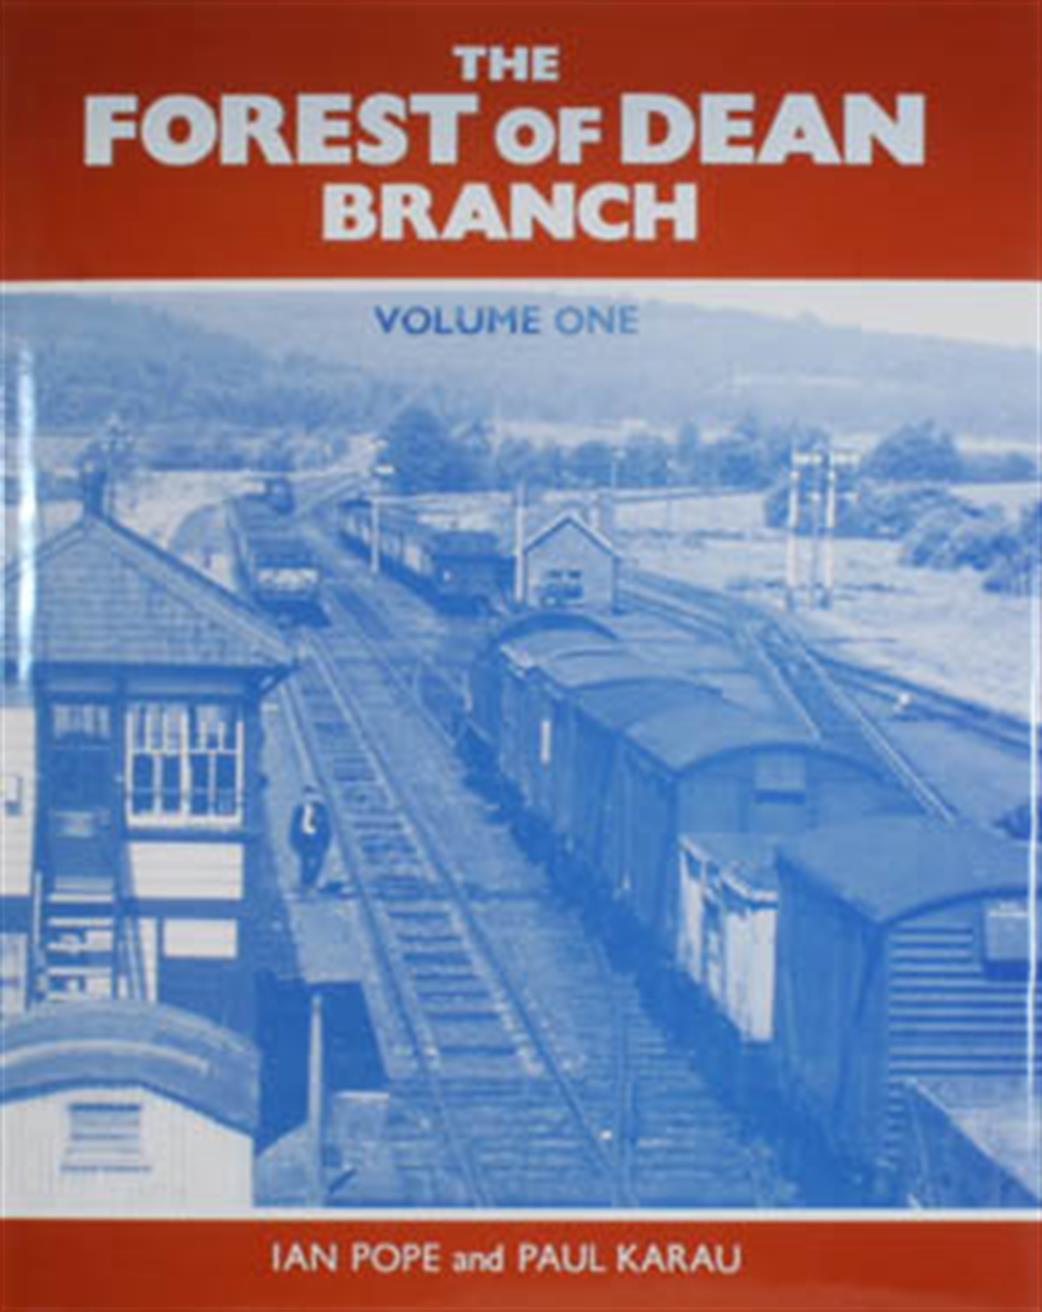 Wild Swan  1874103054 The Forest of Dean Branch Volume One Book by Ian Pope & Paul Karau